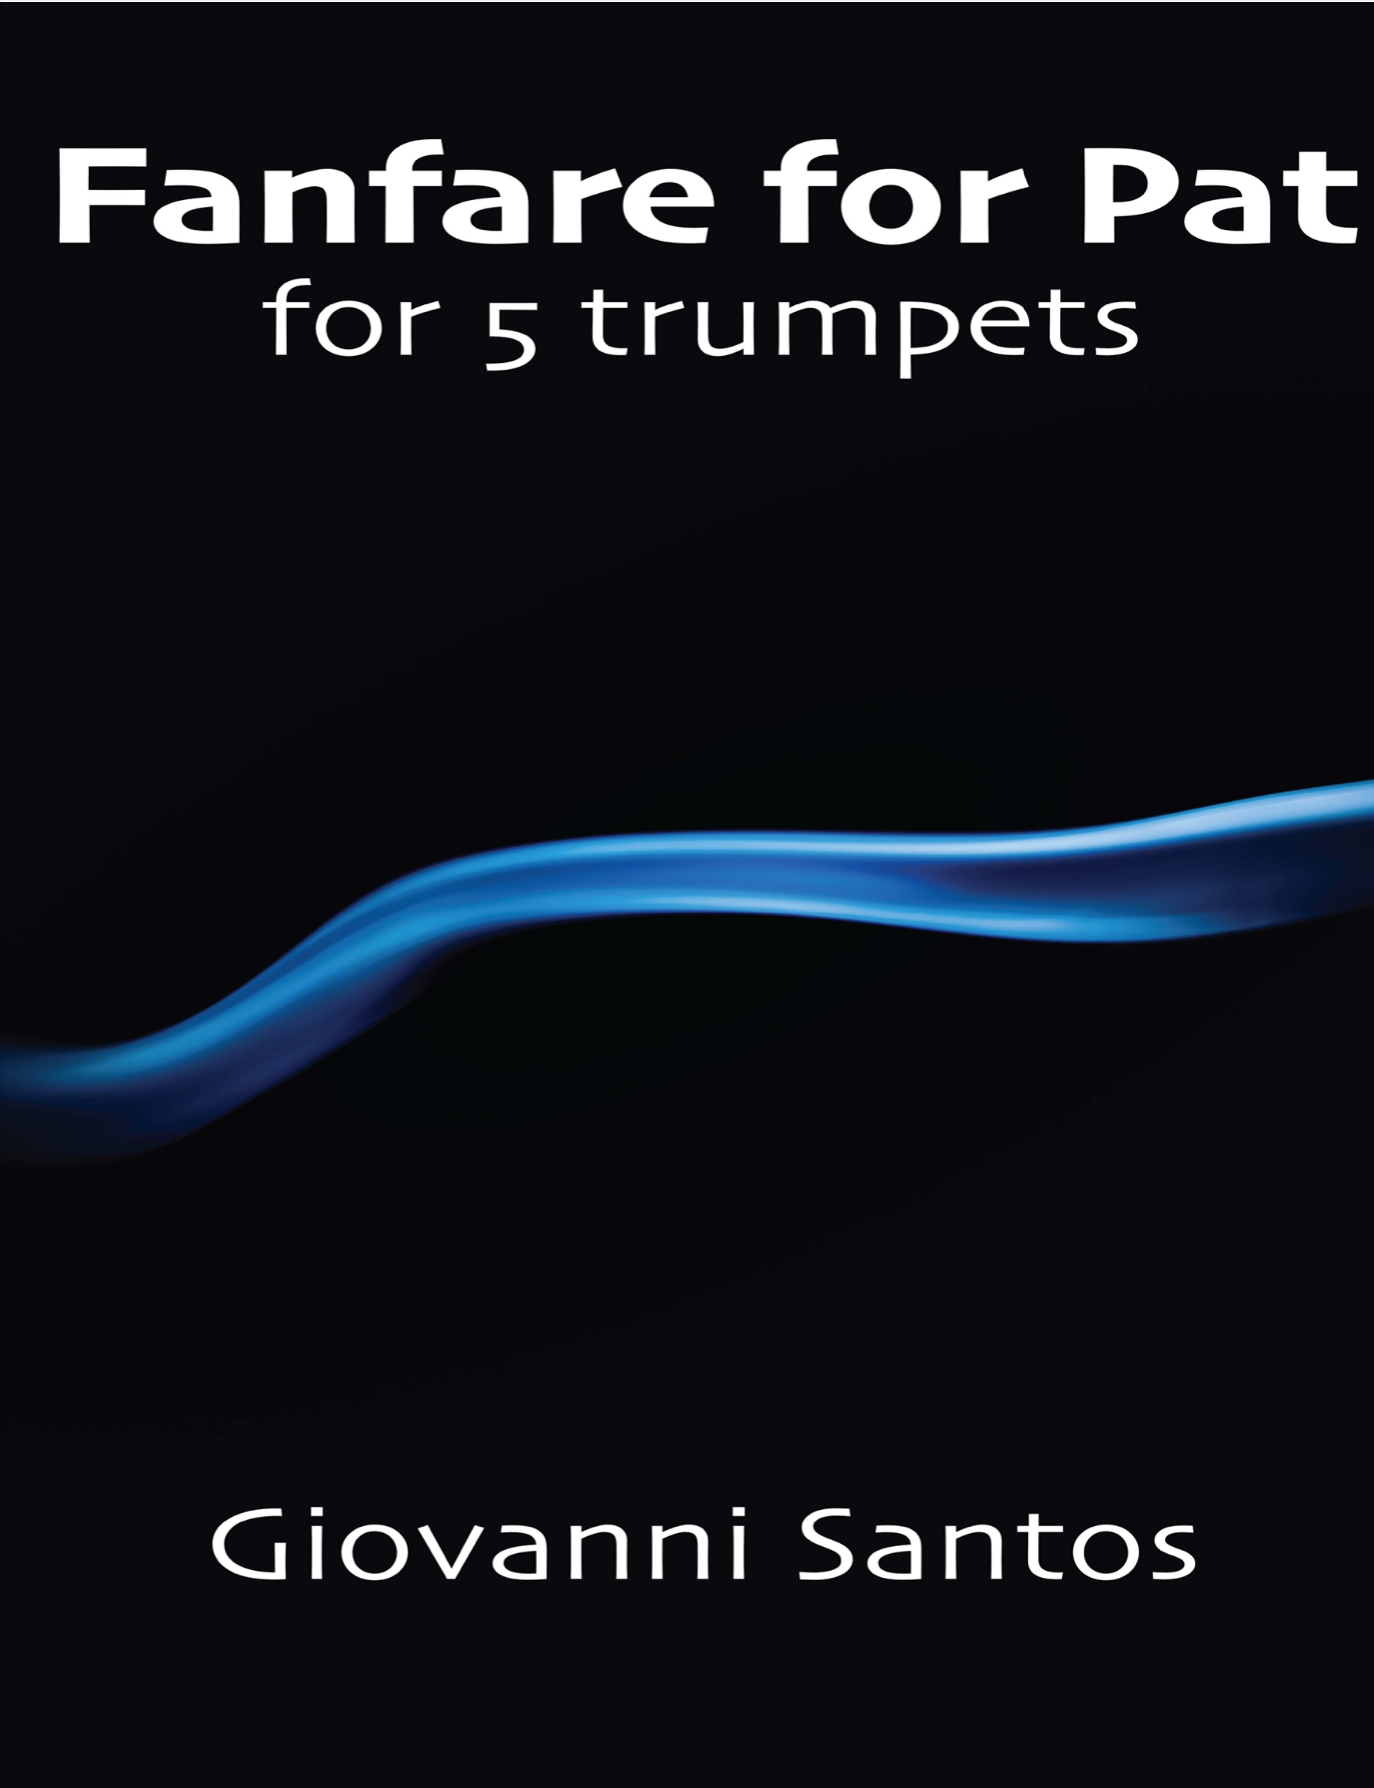 Fanfare For Pat by Giovanni Santos